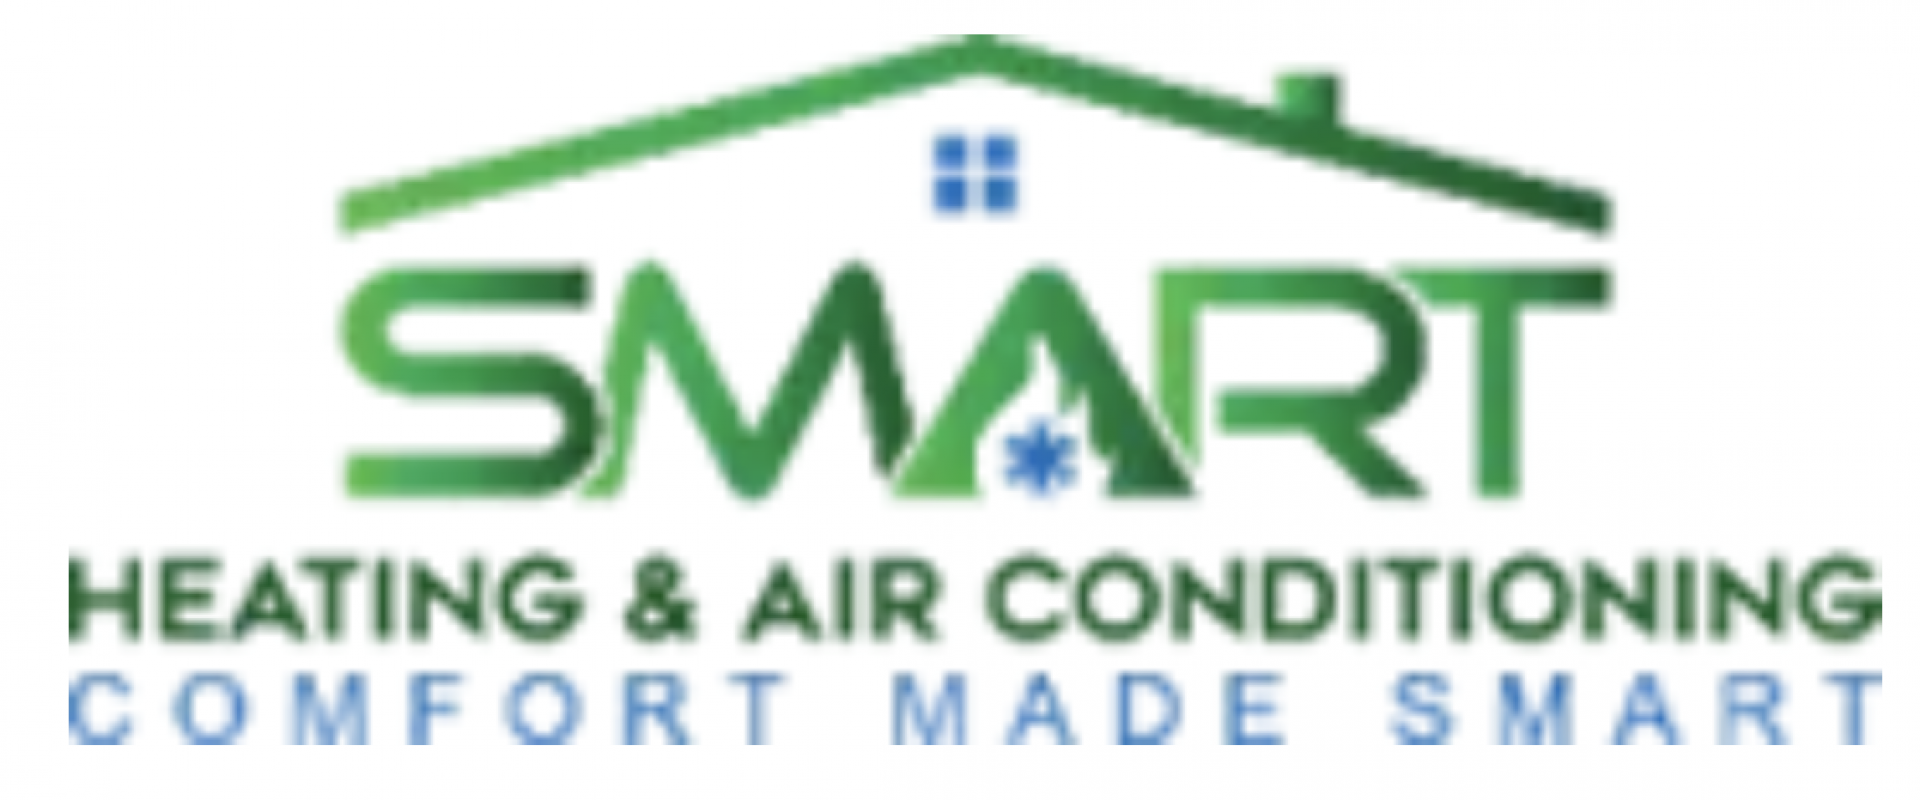 Smart Heating and Air Conditioning, Inc logo